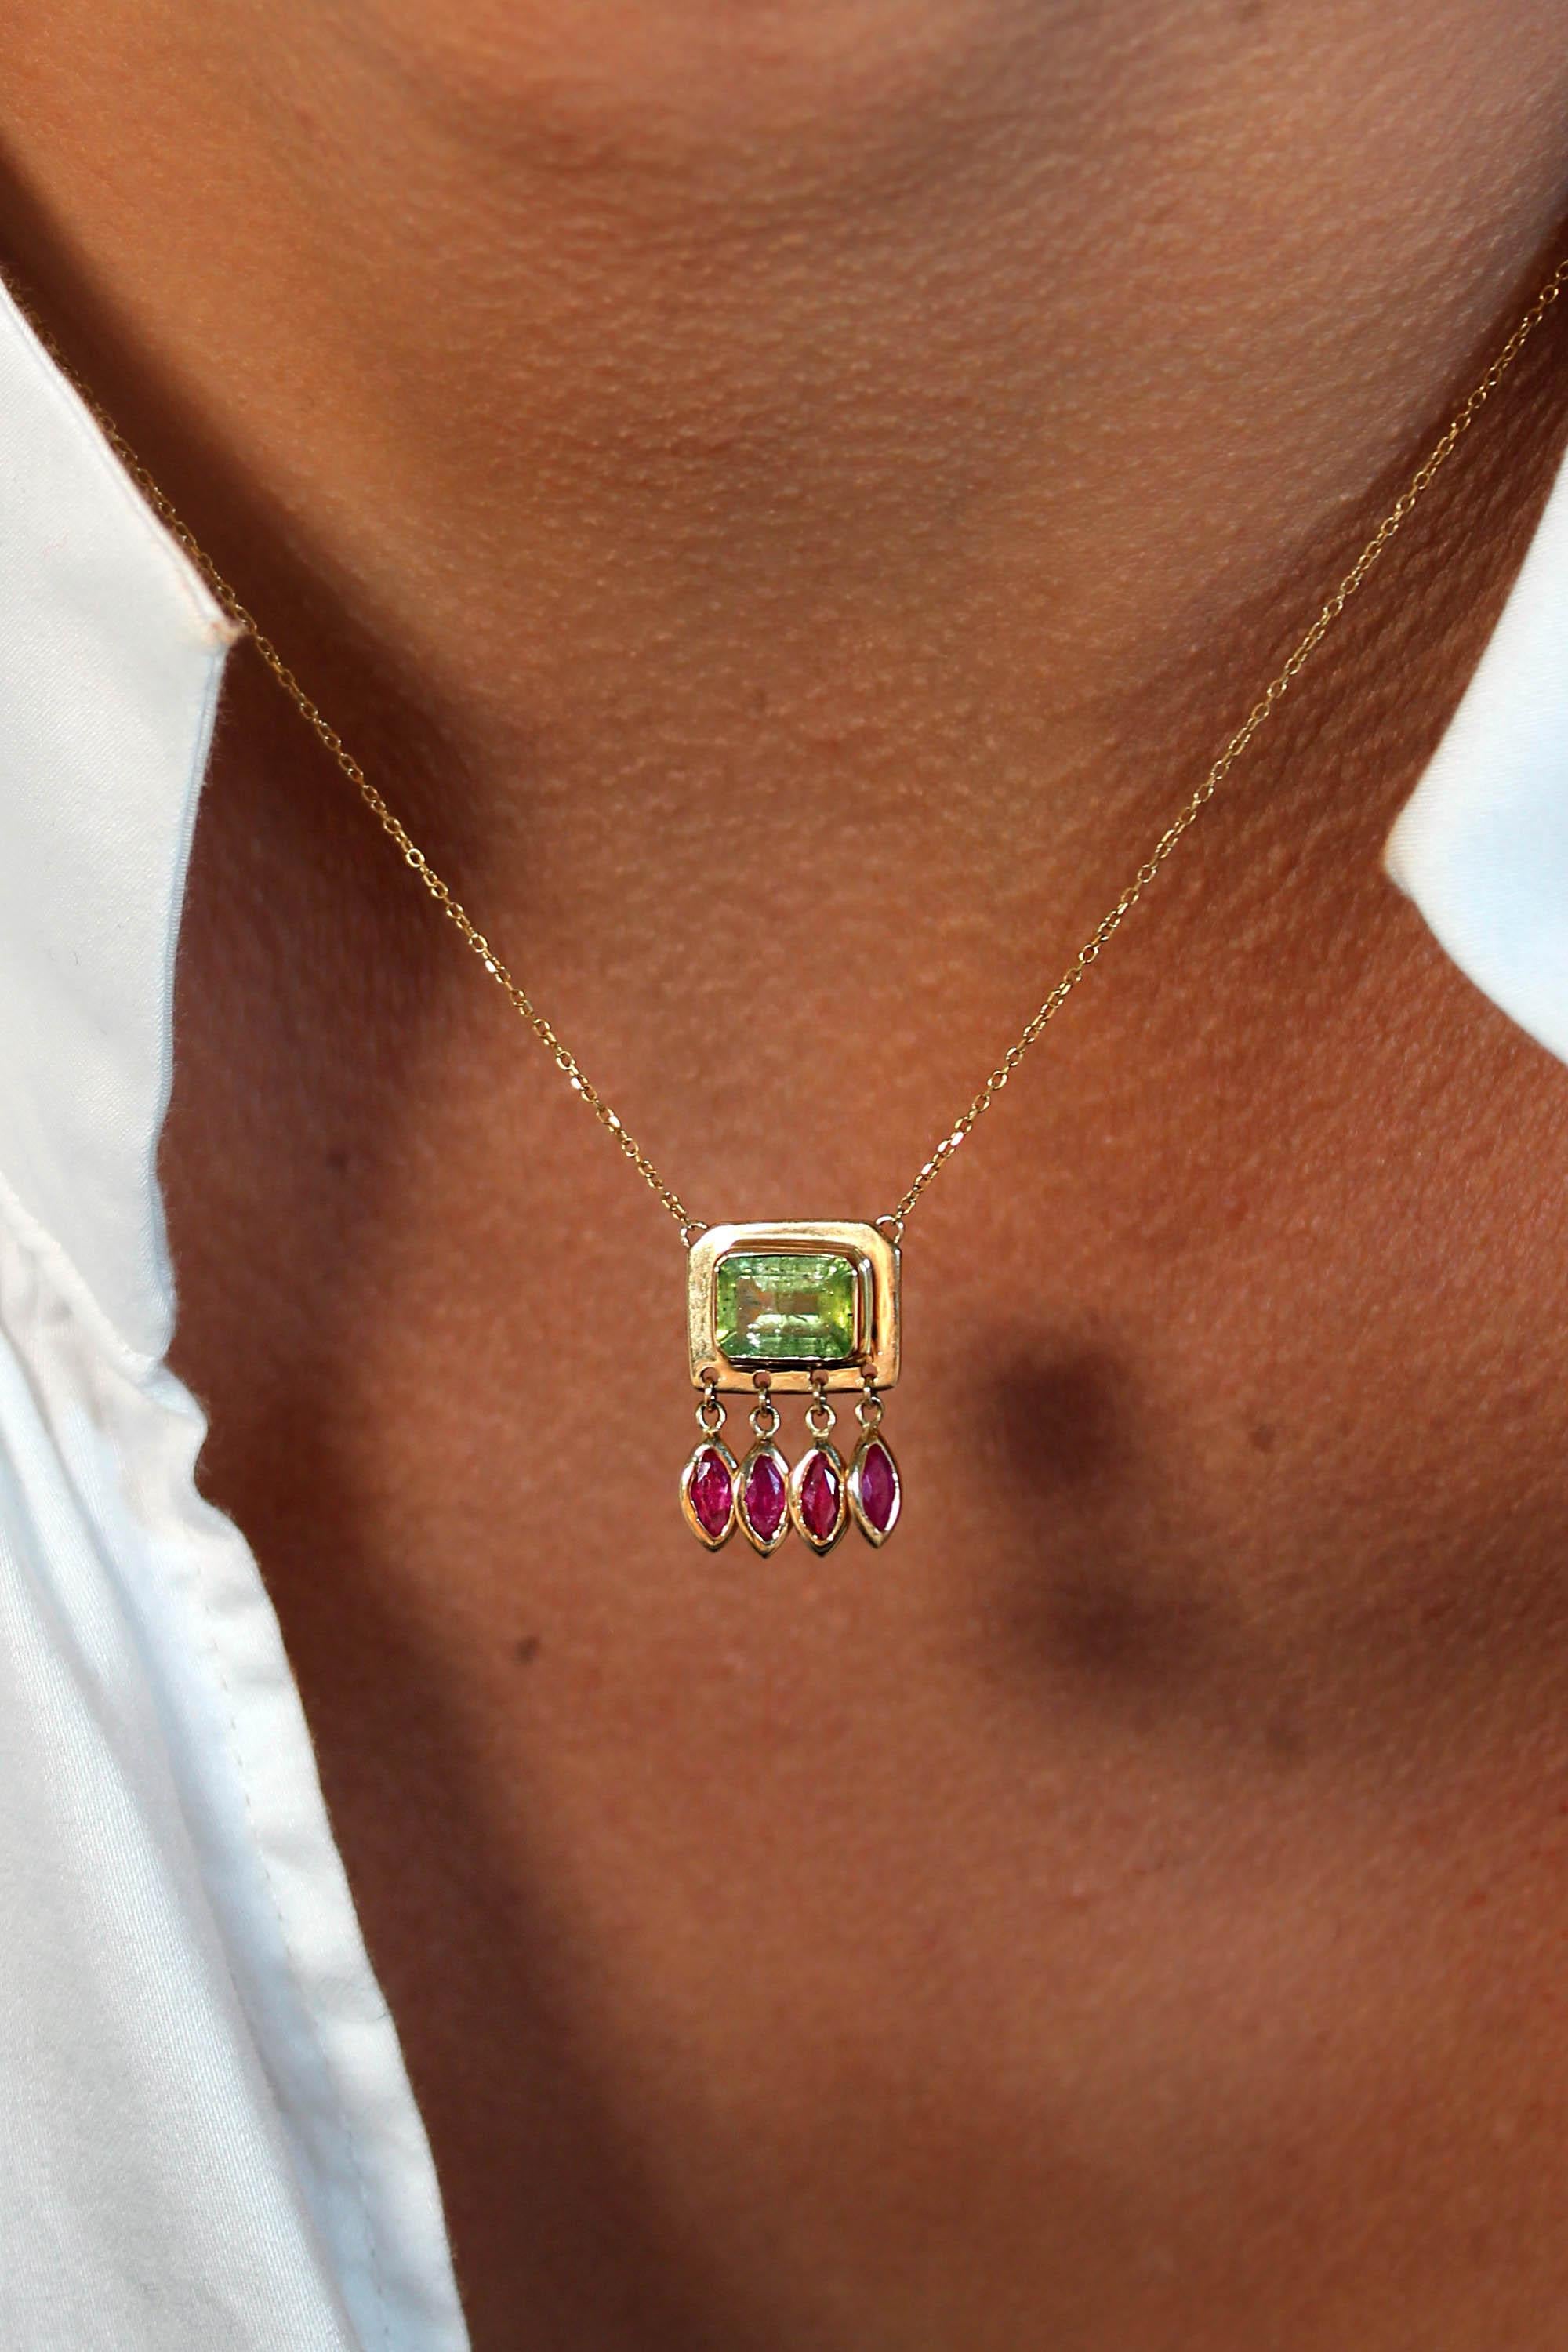 Inspired by a boat ride across the glittering waters of the Calanques de Cassis in the south of France, the dangling gems and pool of lime green tourmaline symbolize the hypnotic nature of water. 

A central tourmaline drips with 4 dangling